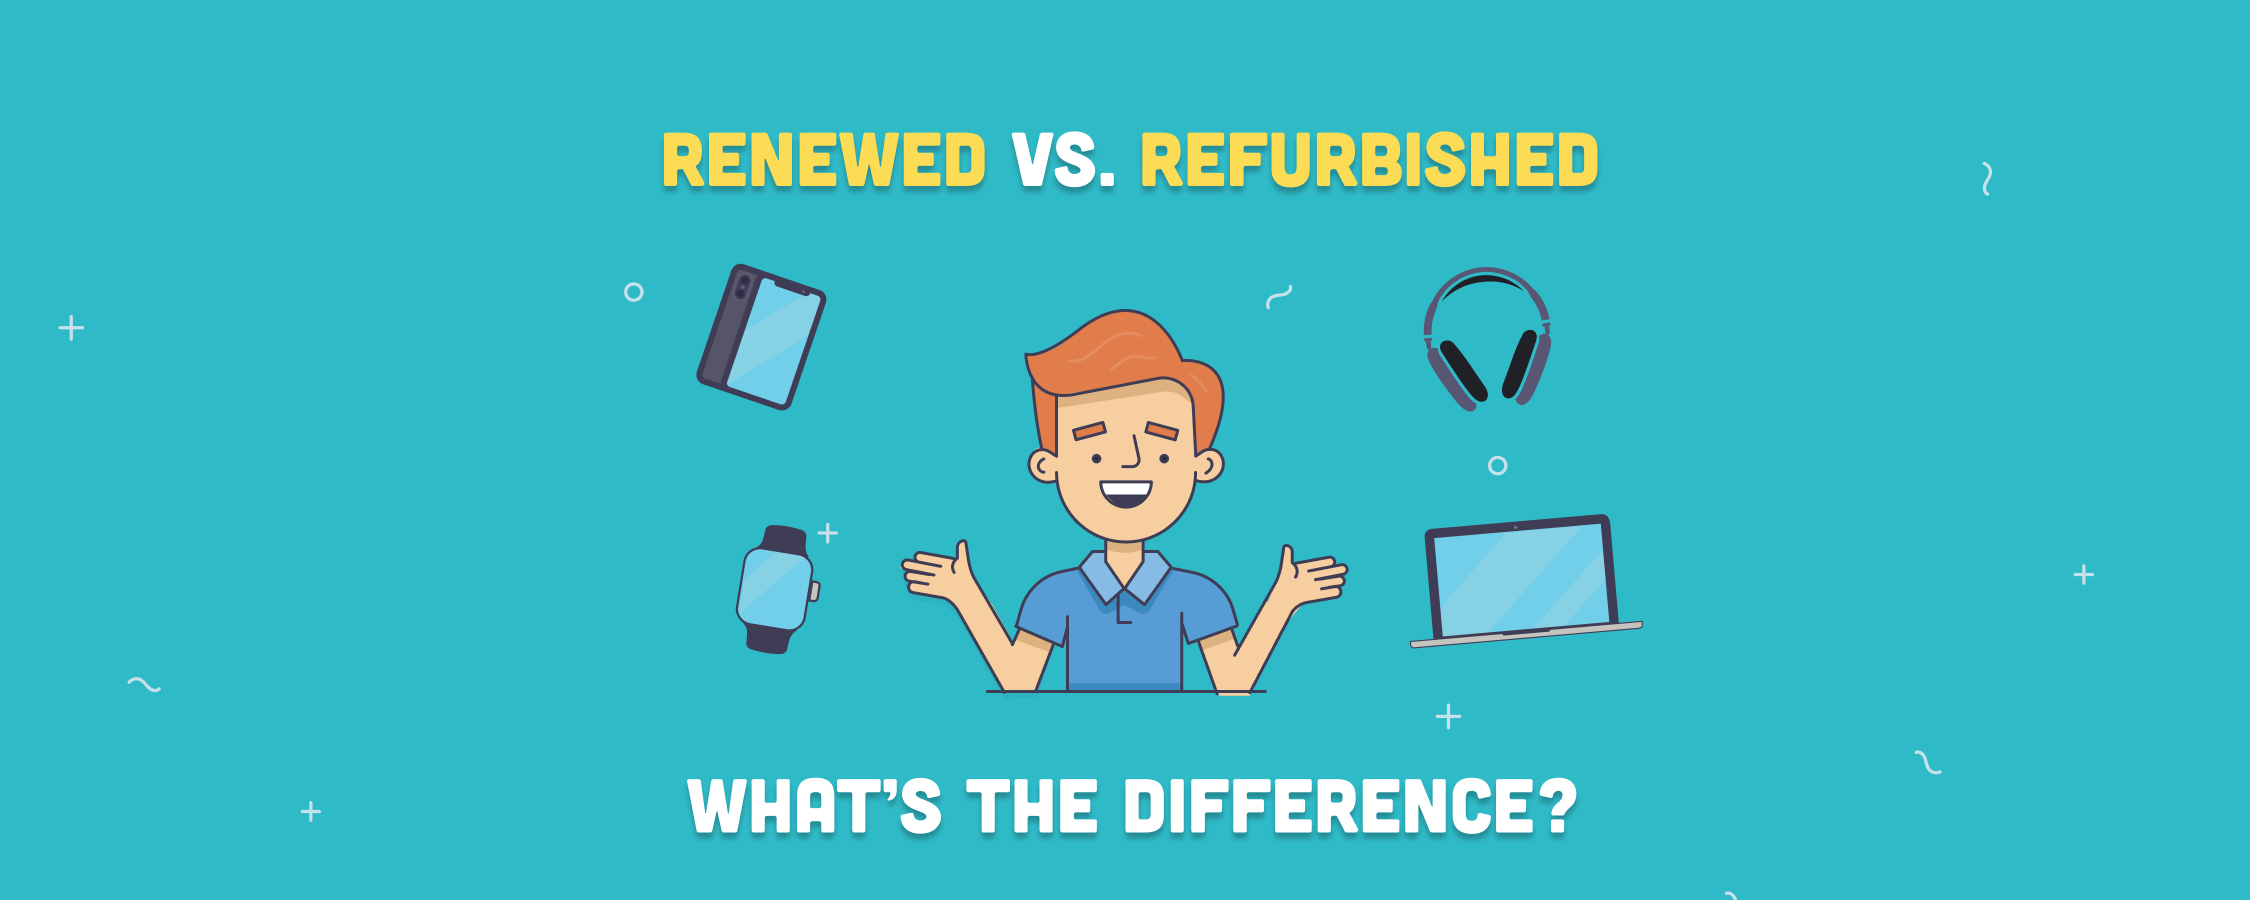 Renewed vs. Refurbished: Is There Any Difference?